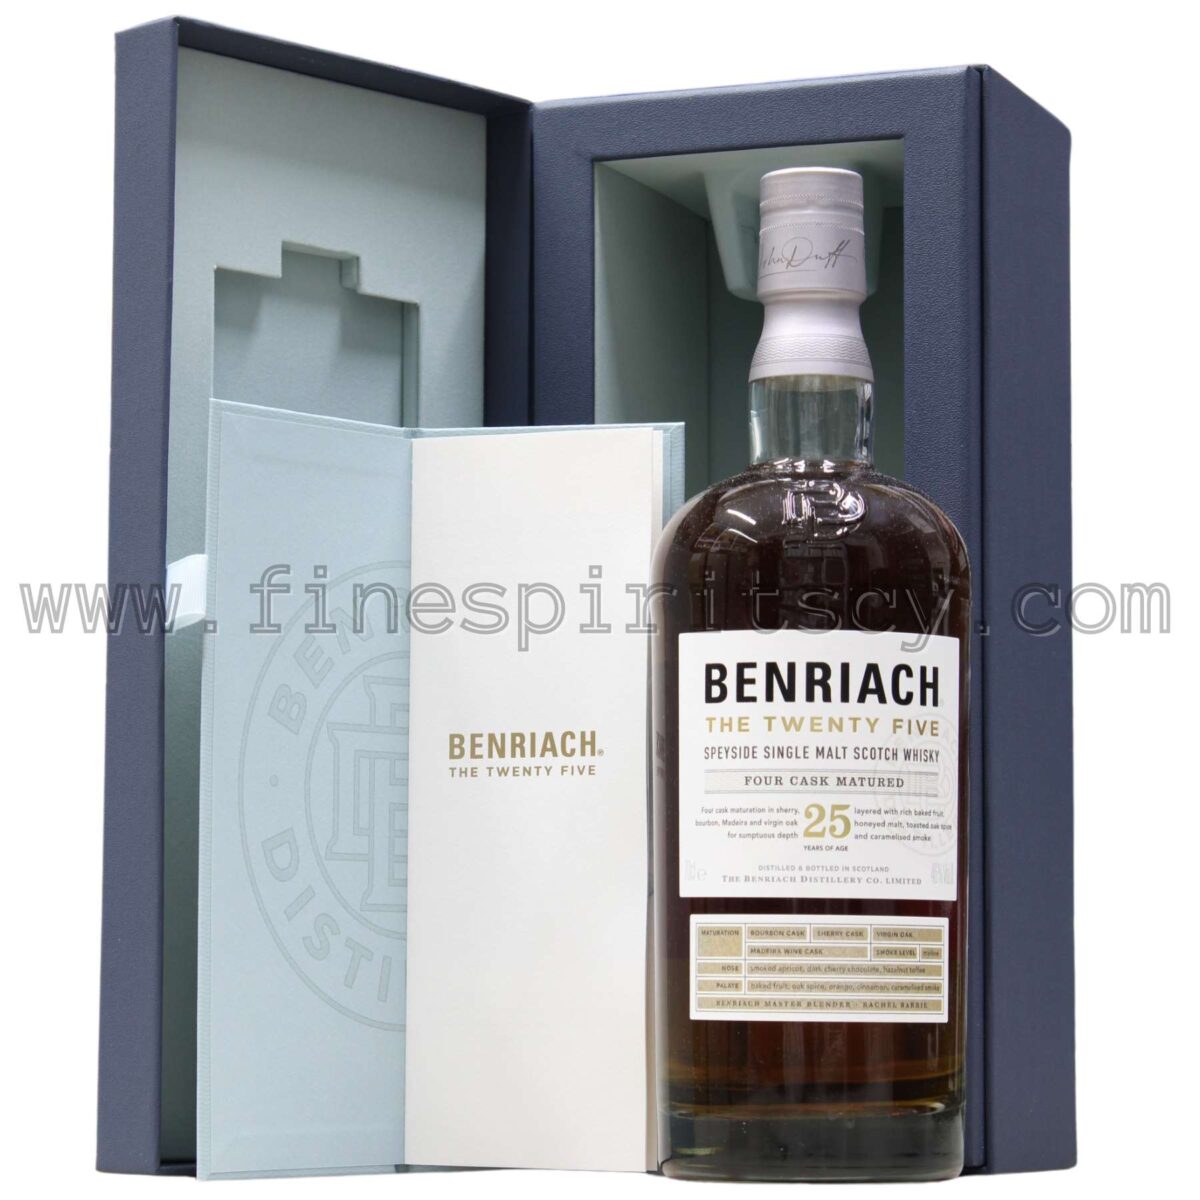 The Benriach 25Y/O Twenty Five Open Box Book Bottle Notes Pages